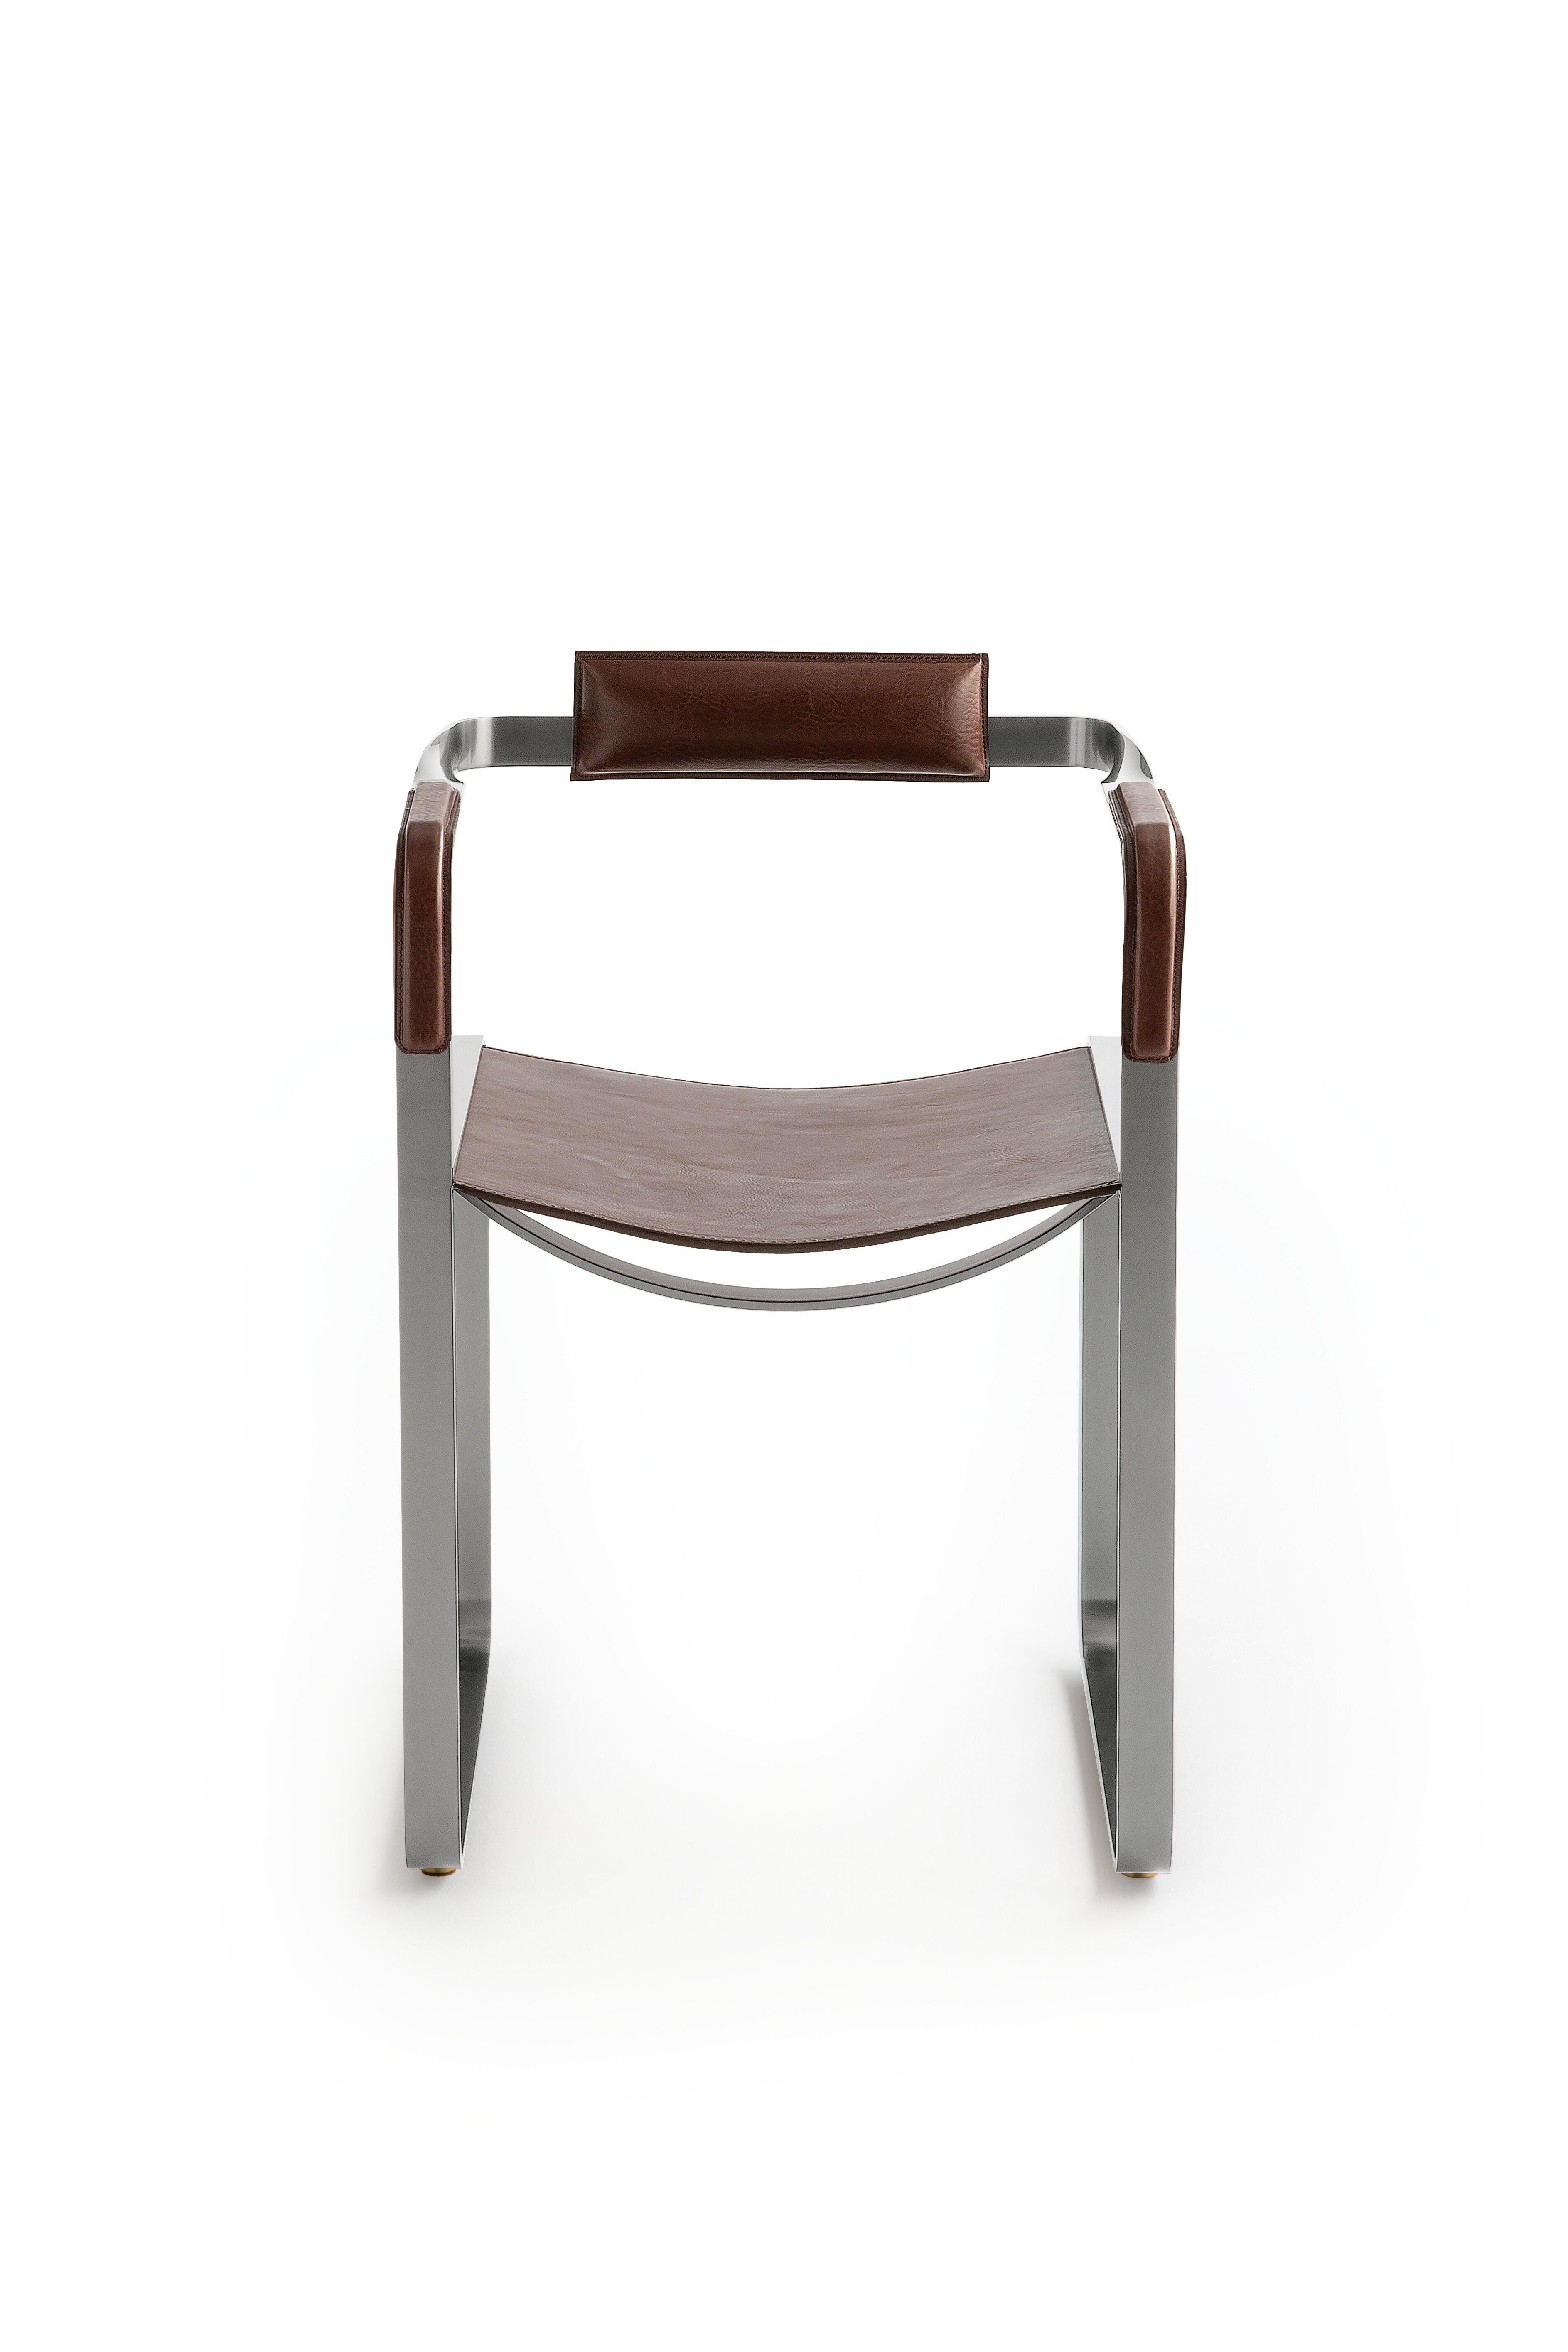 Spanish Armchair, Old Silver Steel and Dark Brown Saddle Leather, Contemporary Style For Sale